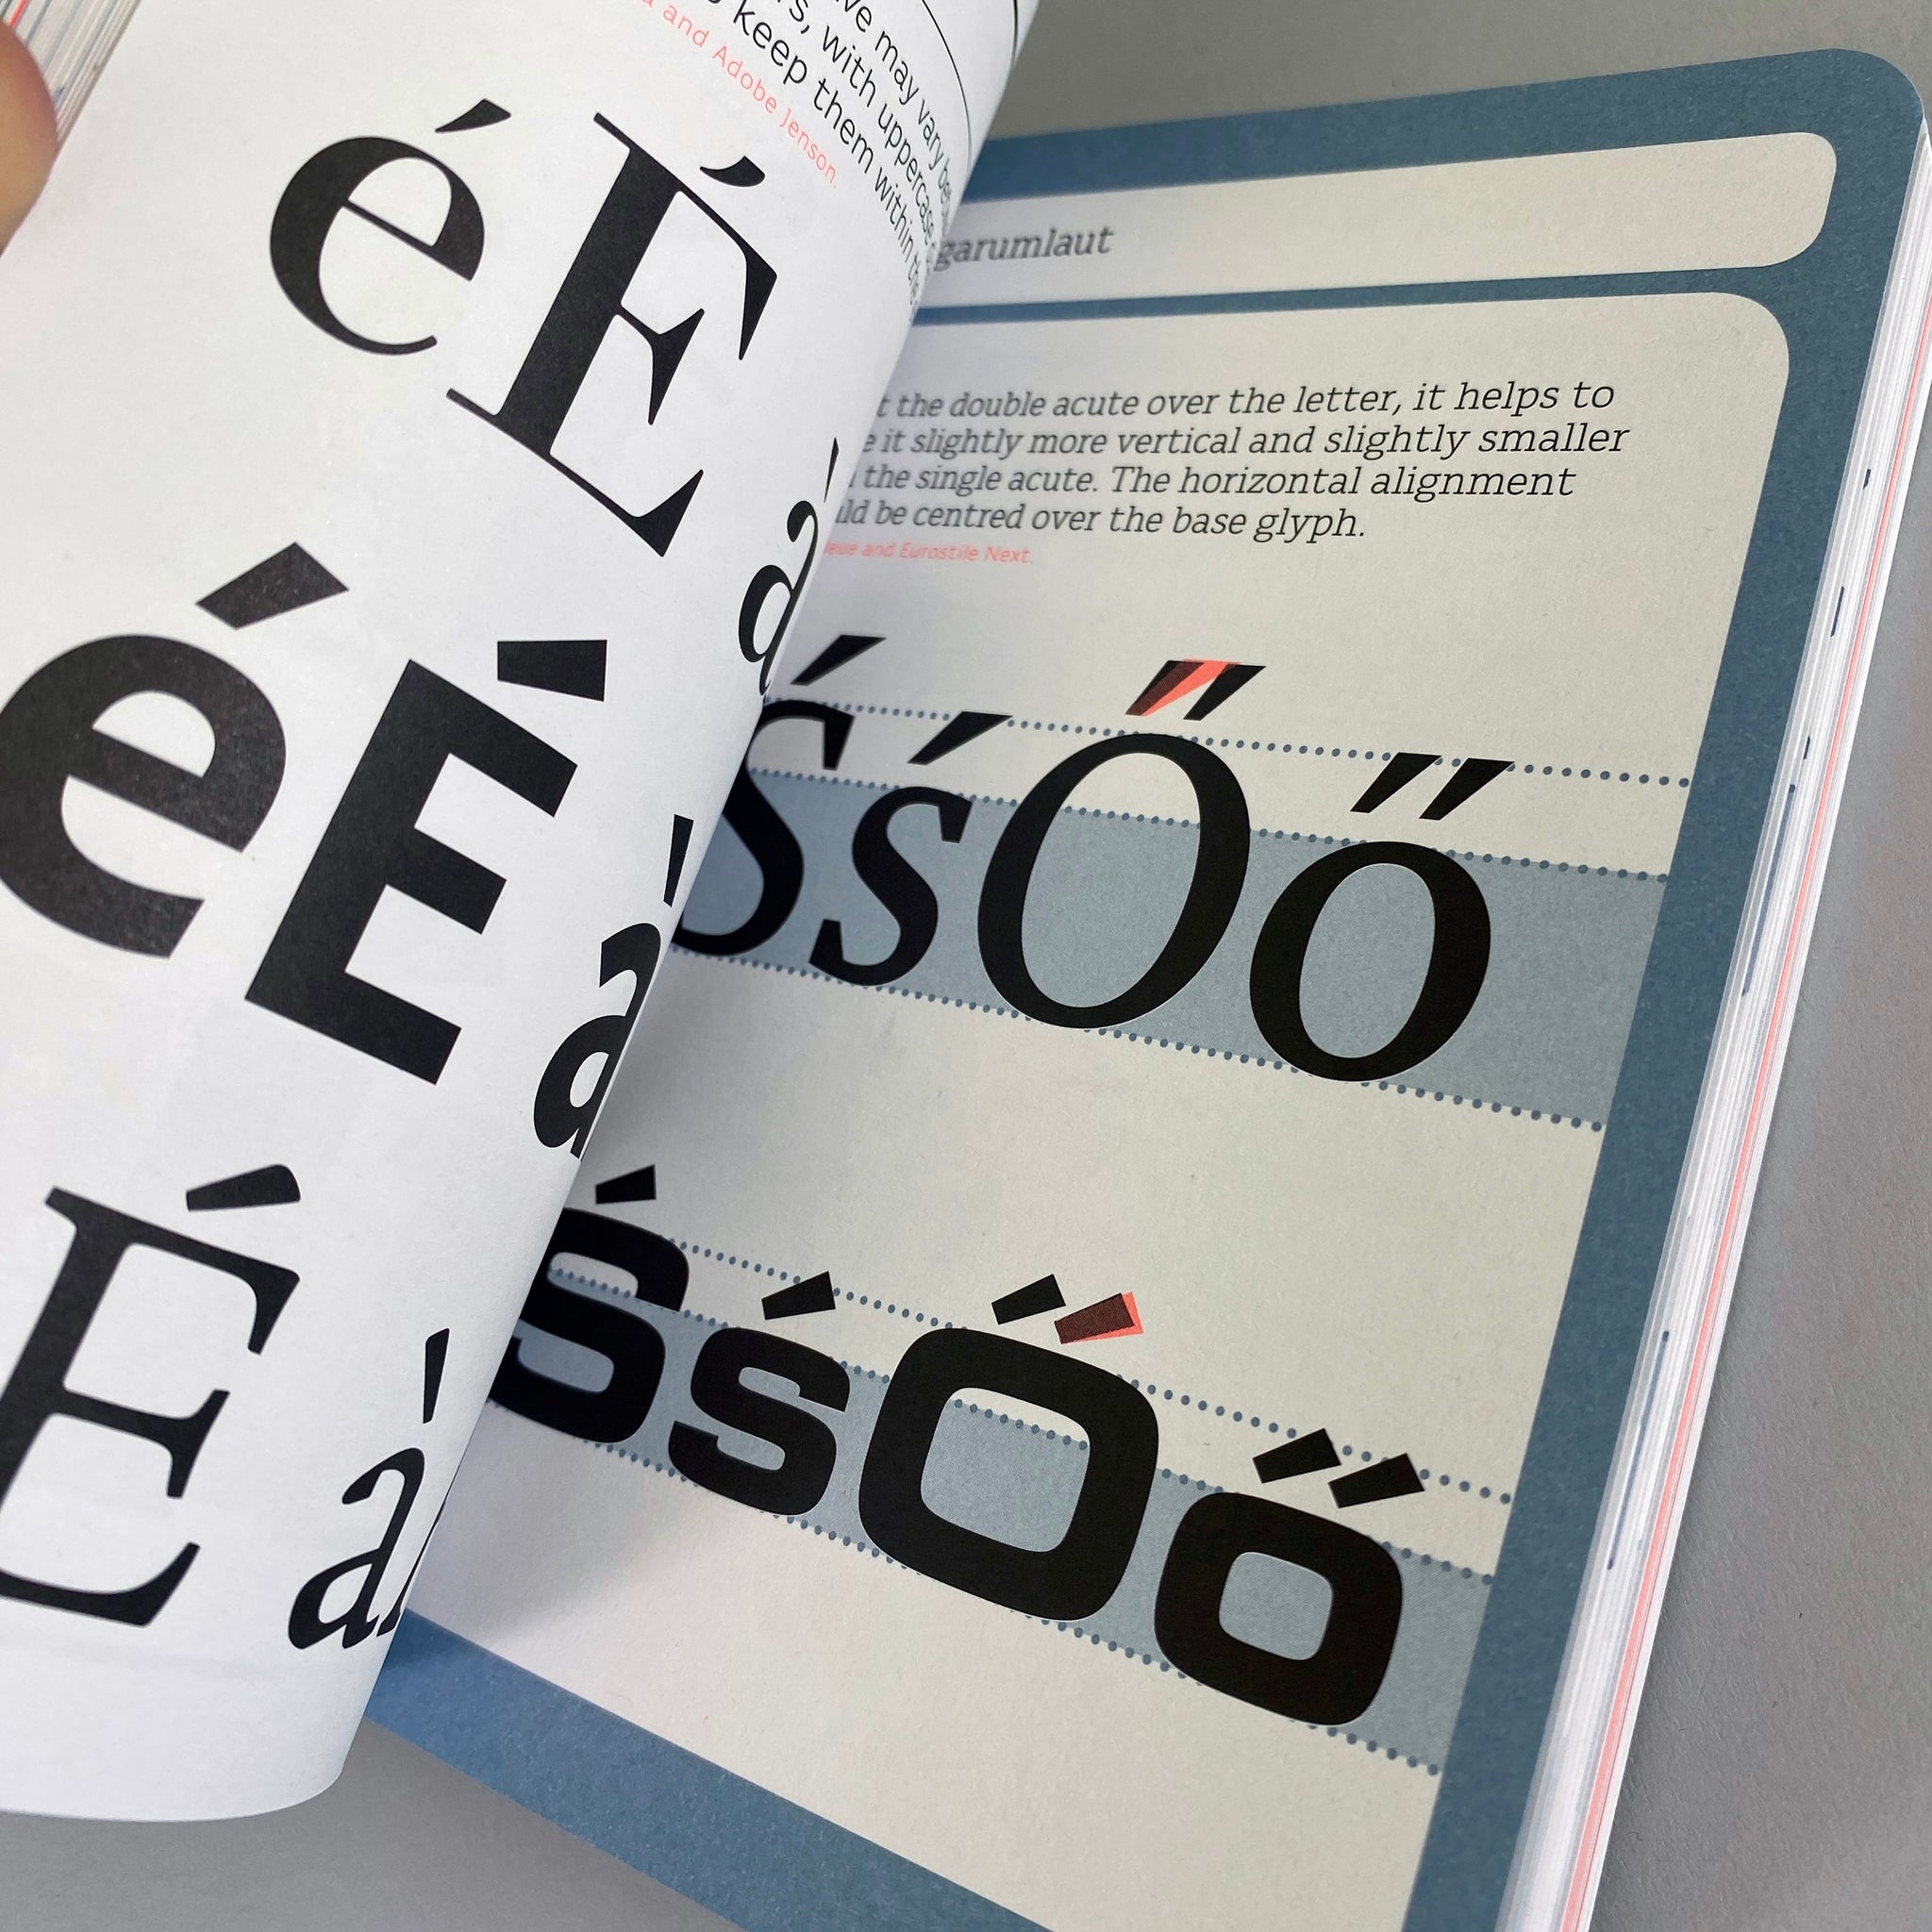 Type Tricks: Your Personal Guide to Type Design